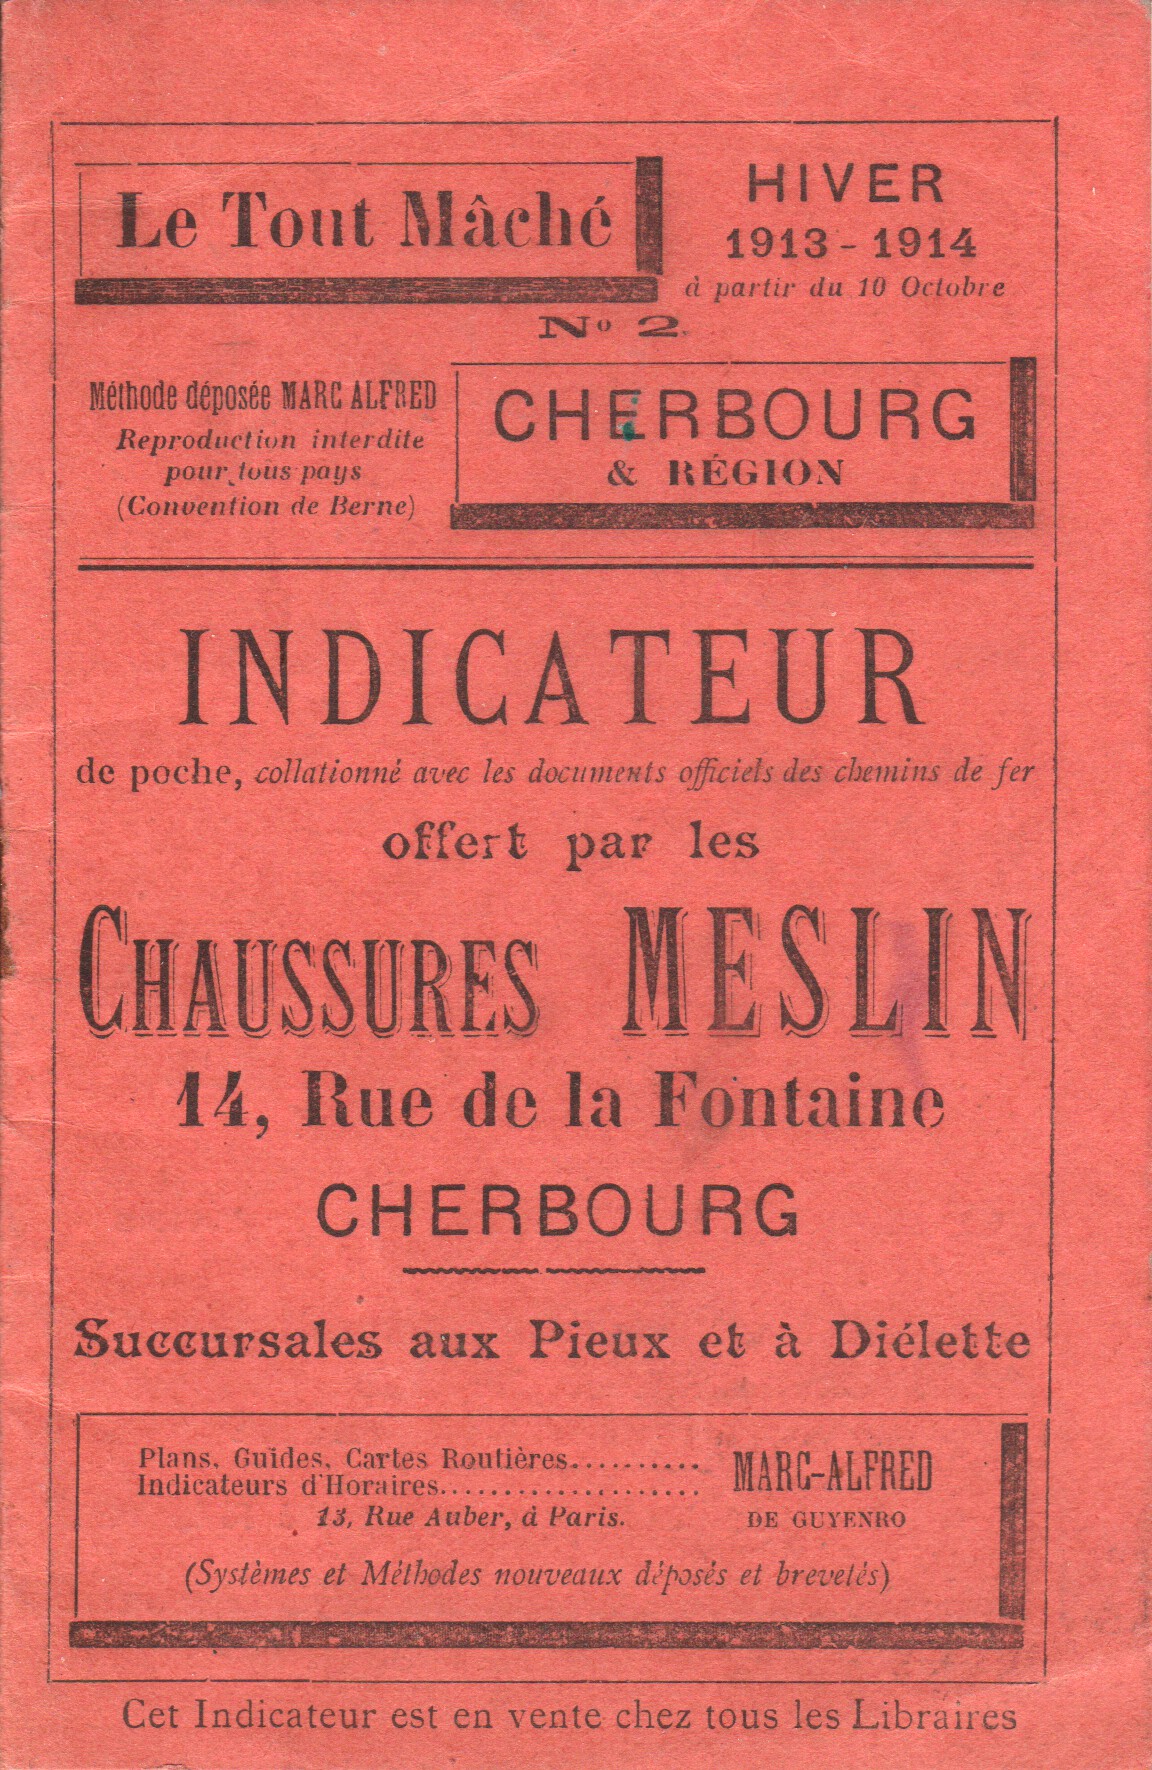 Meslin timetable 1913 front cover